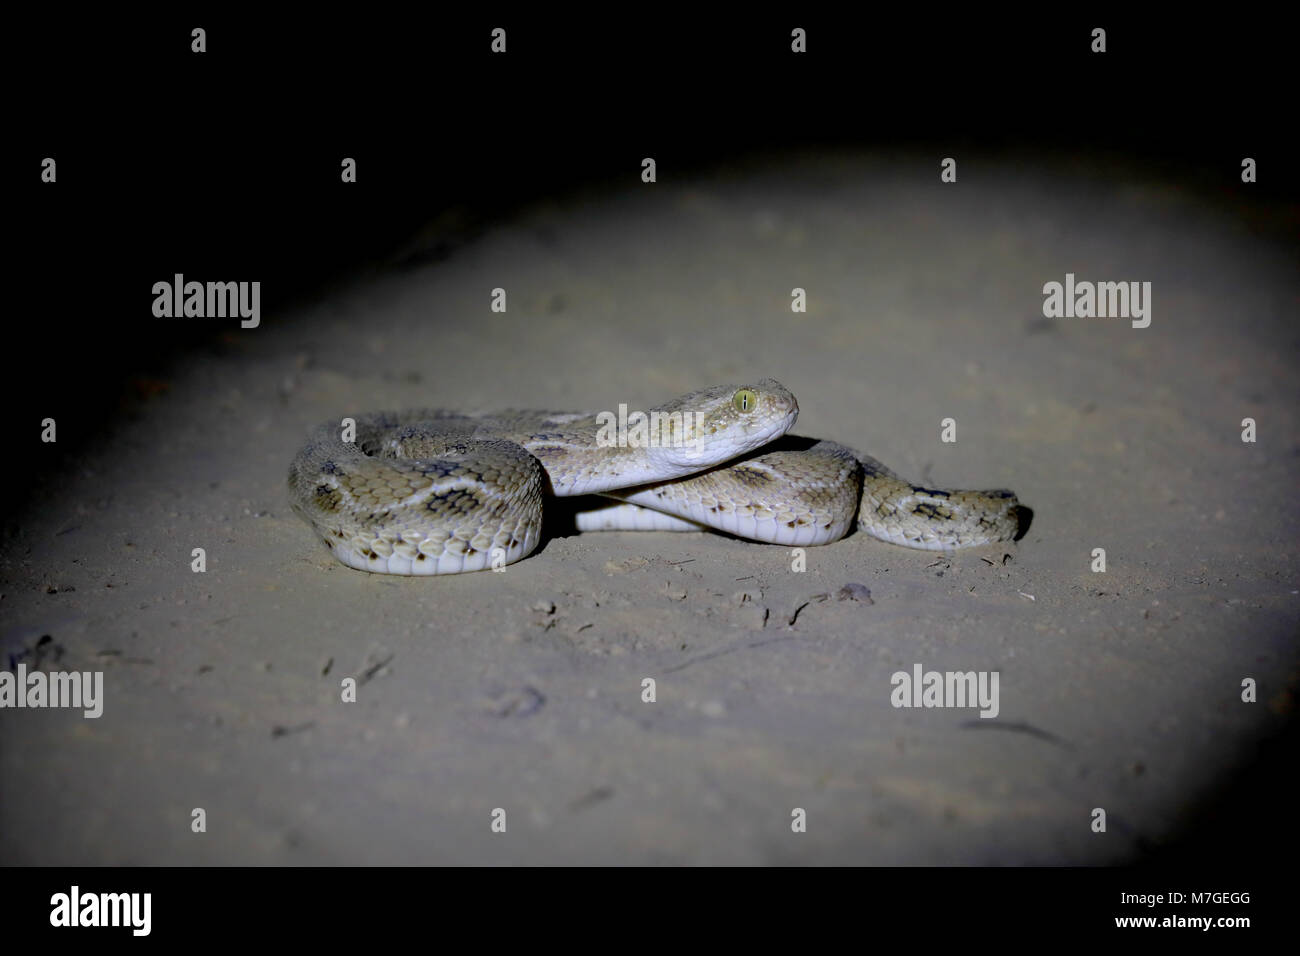 An adult Saw-scaled Viper or Little Indian Viper (Echis carinatus) snake in a sandy area close to the Great Rann of Kutch, Gujarat, India Stock Photo